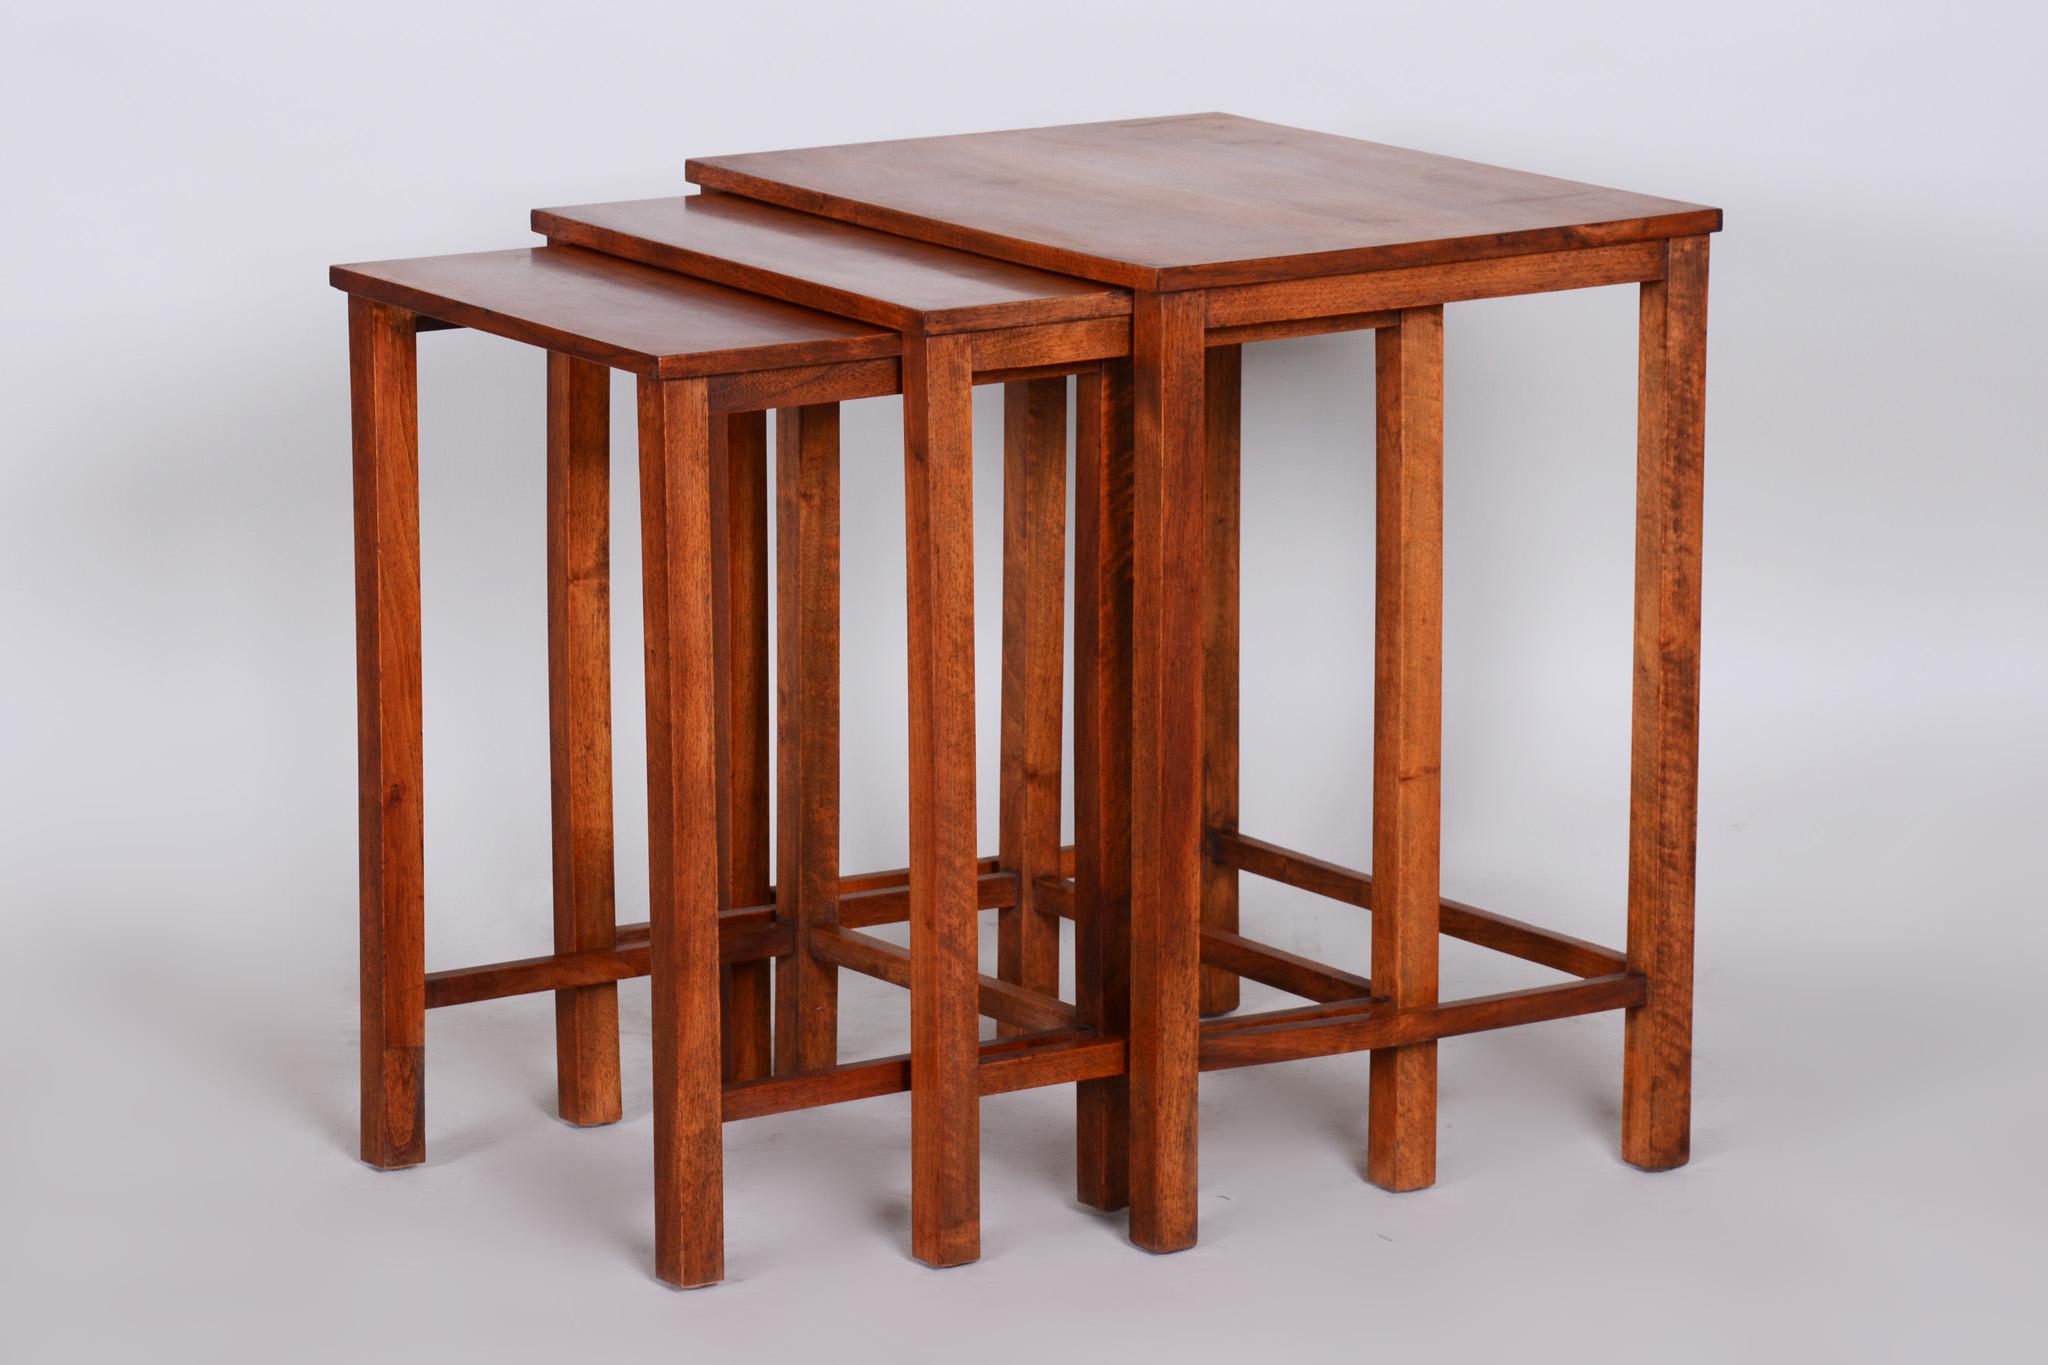 Beautiful brown nest tables made in the 1930s, they are made out of walnut.